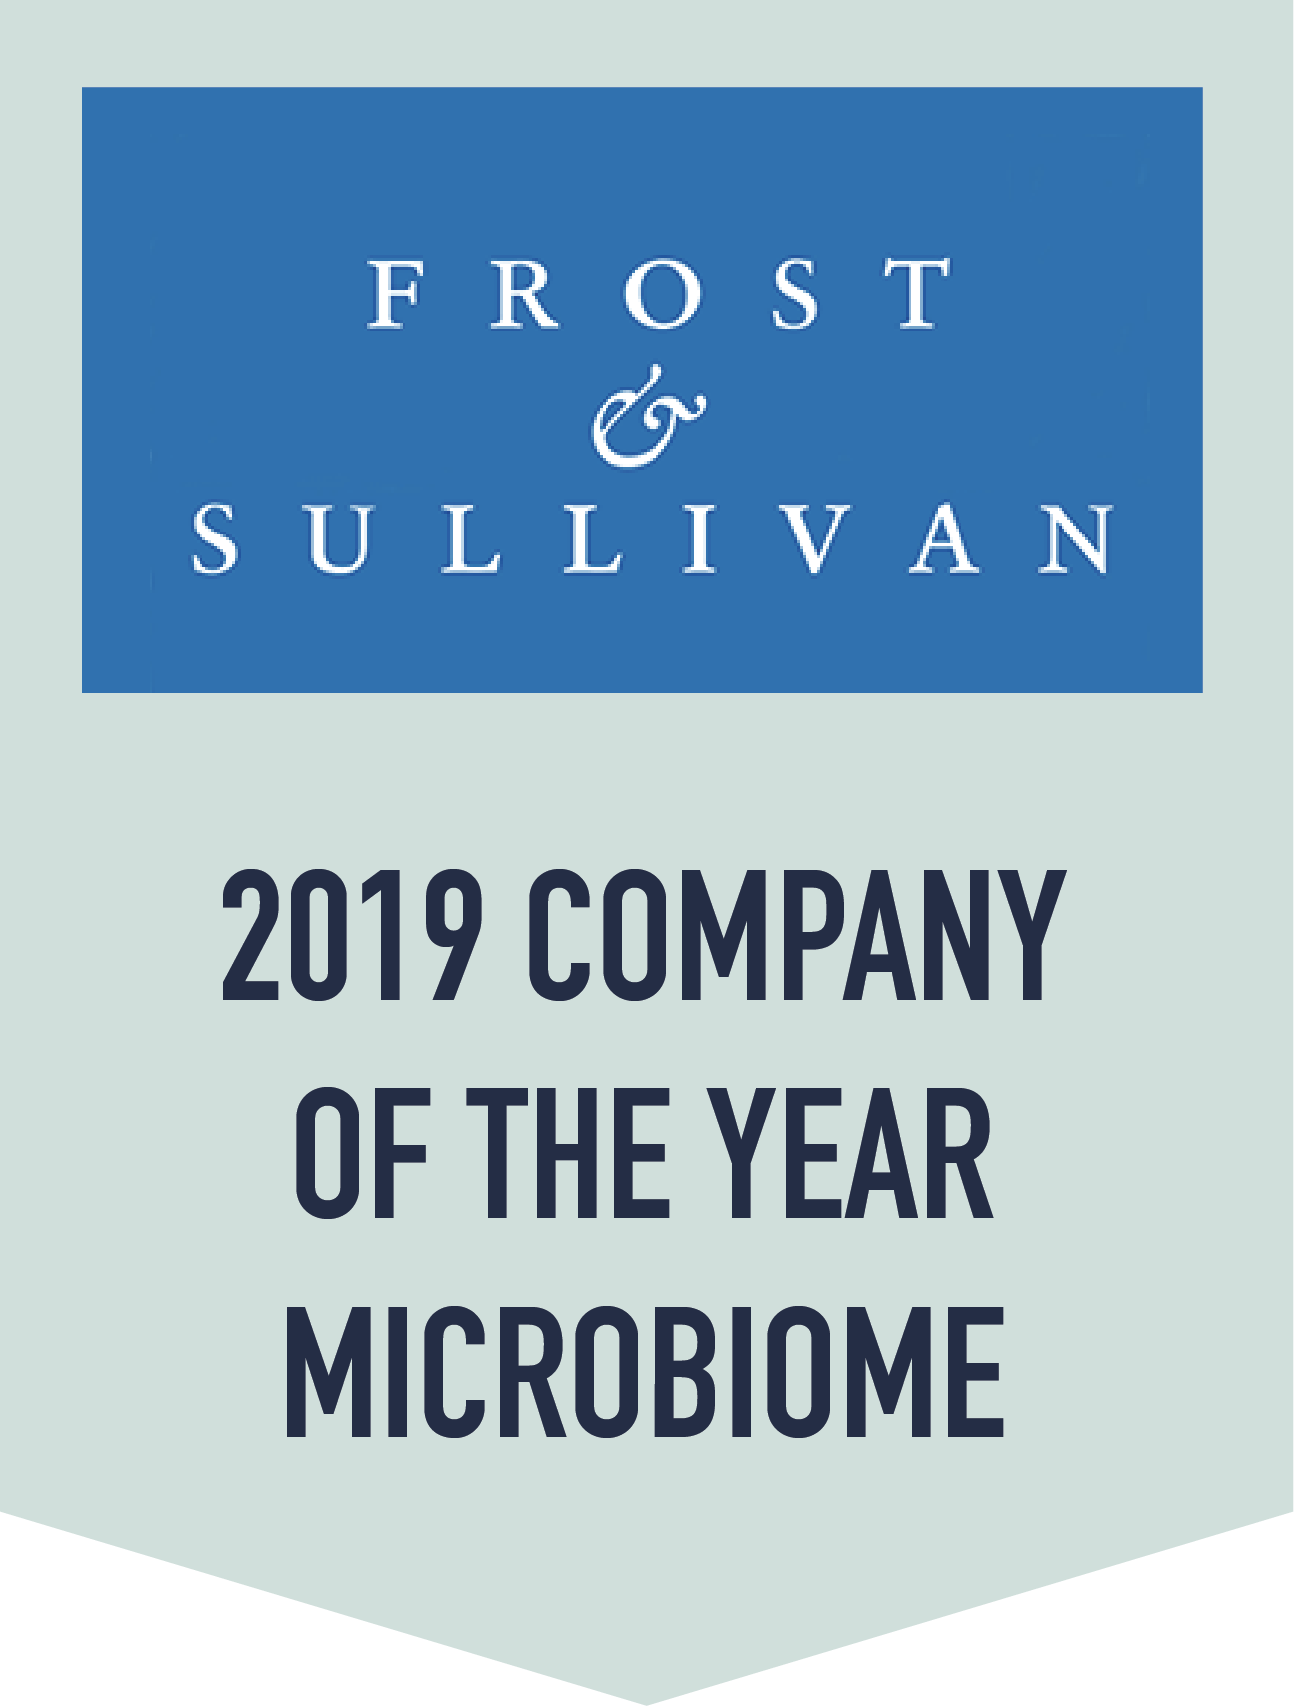 Viome Recognized by Frost & Sullivan as a 2019 Company of the Year for its Mission to Make Chronic